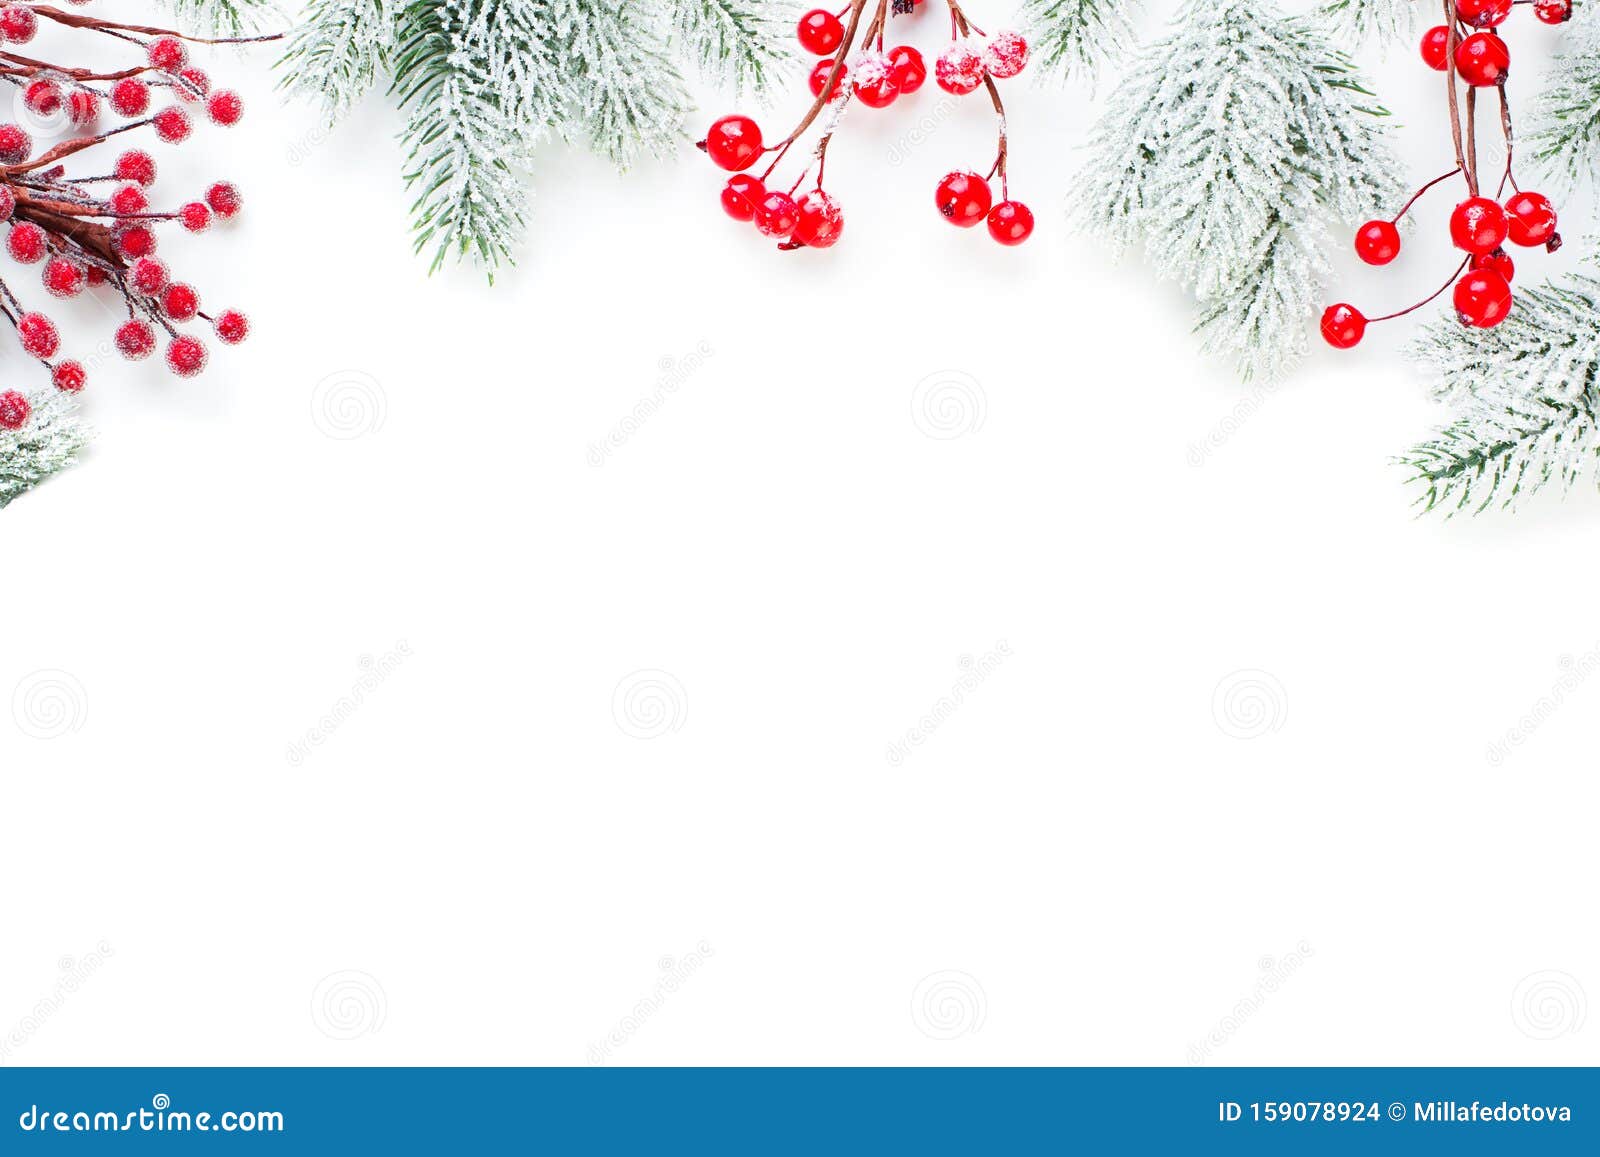 Frosted Branches With Red Berries, Christmas Decor Free Stock Video Footage  Download Clips Industrial